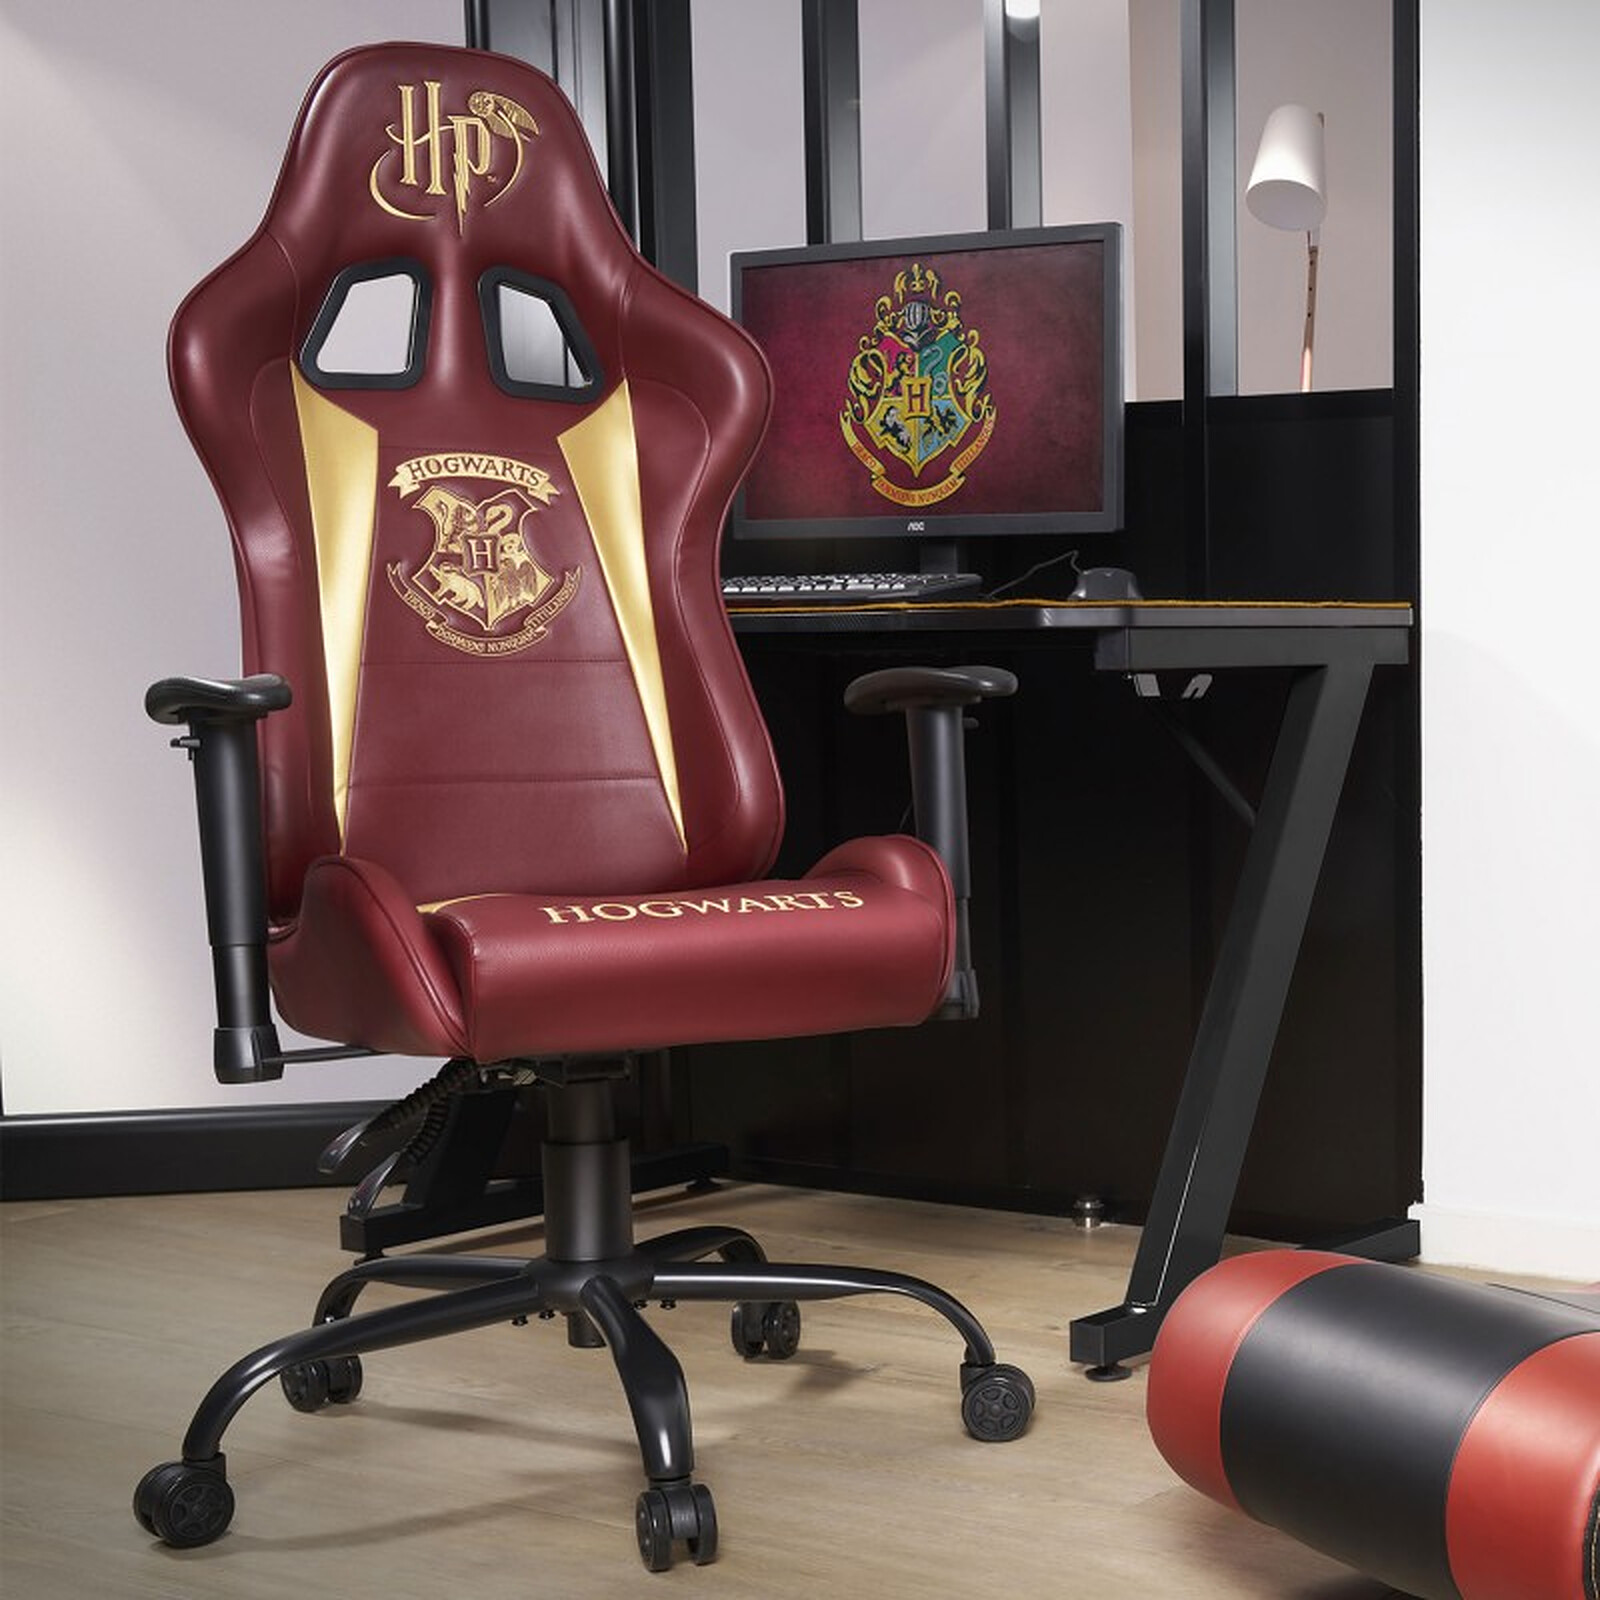 Siège gamer Subsonic Pro Harry Potter Rouge - Chaise gaming - Achat & prix